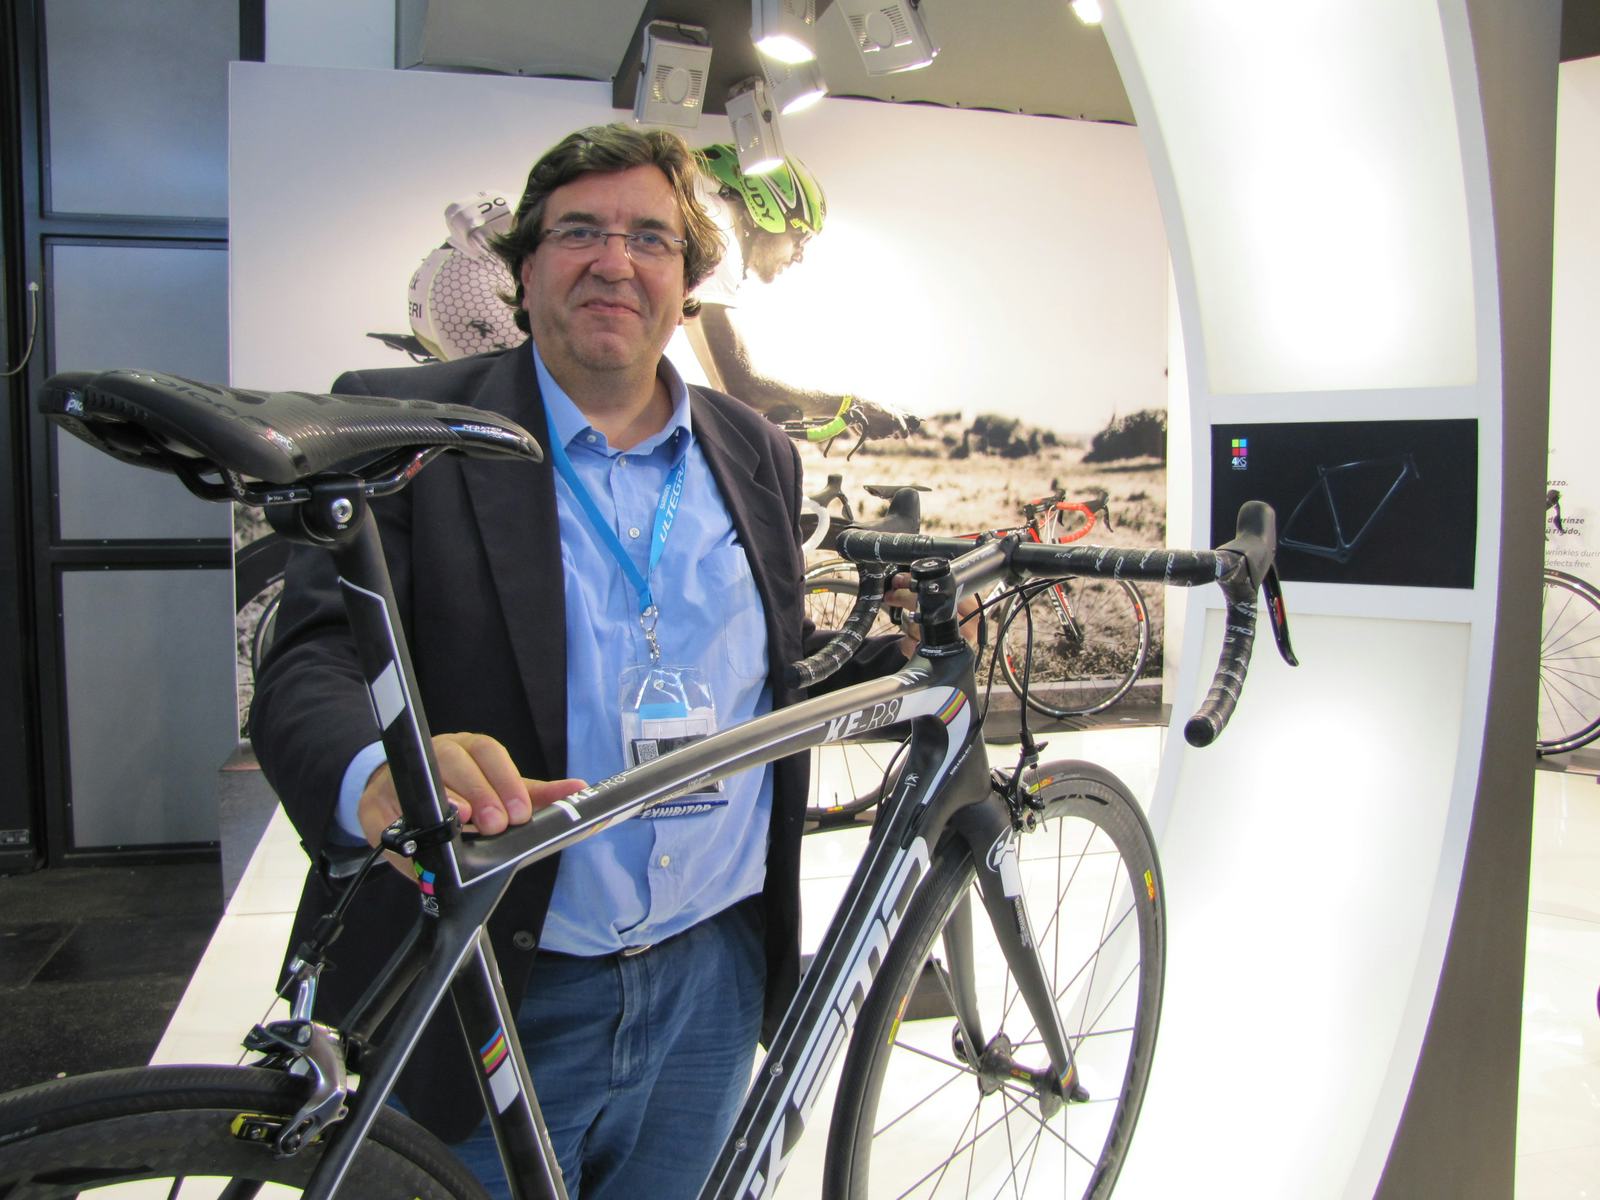 "We offer bicycles featuring the latest in fibers in our industry: TeXtreme", says Mario Comalli of Kemo Bikes. - Photo Bike Europe